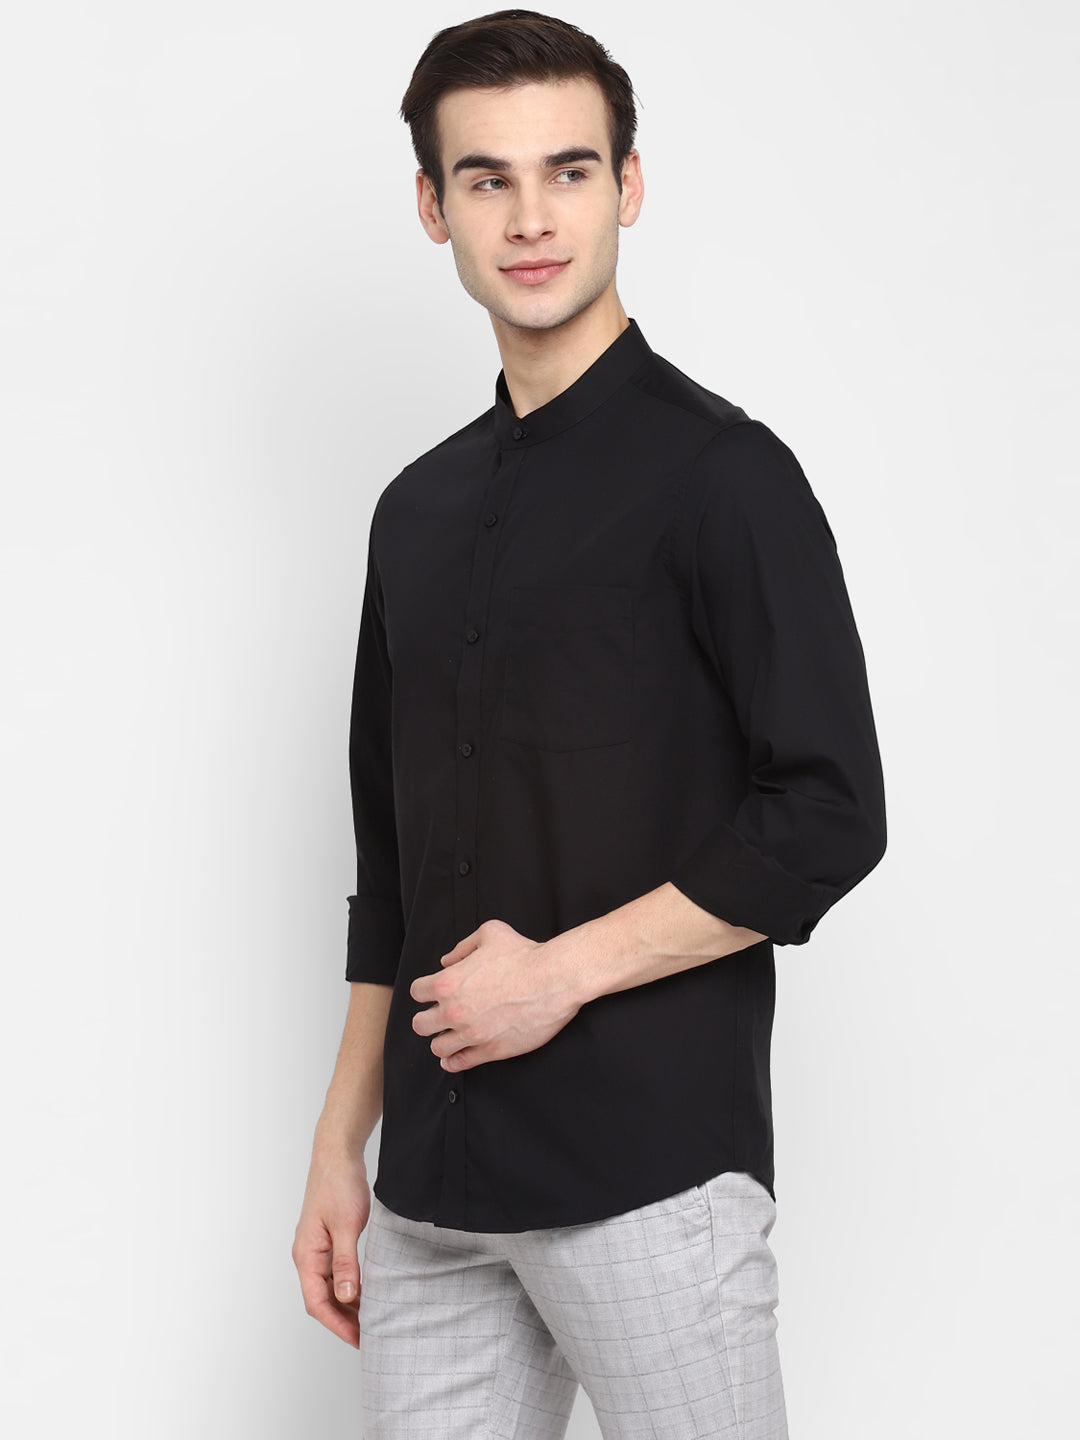 Solid Black Slim Fit Causal Shirt with Band Collar For Men